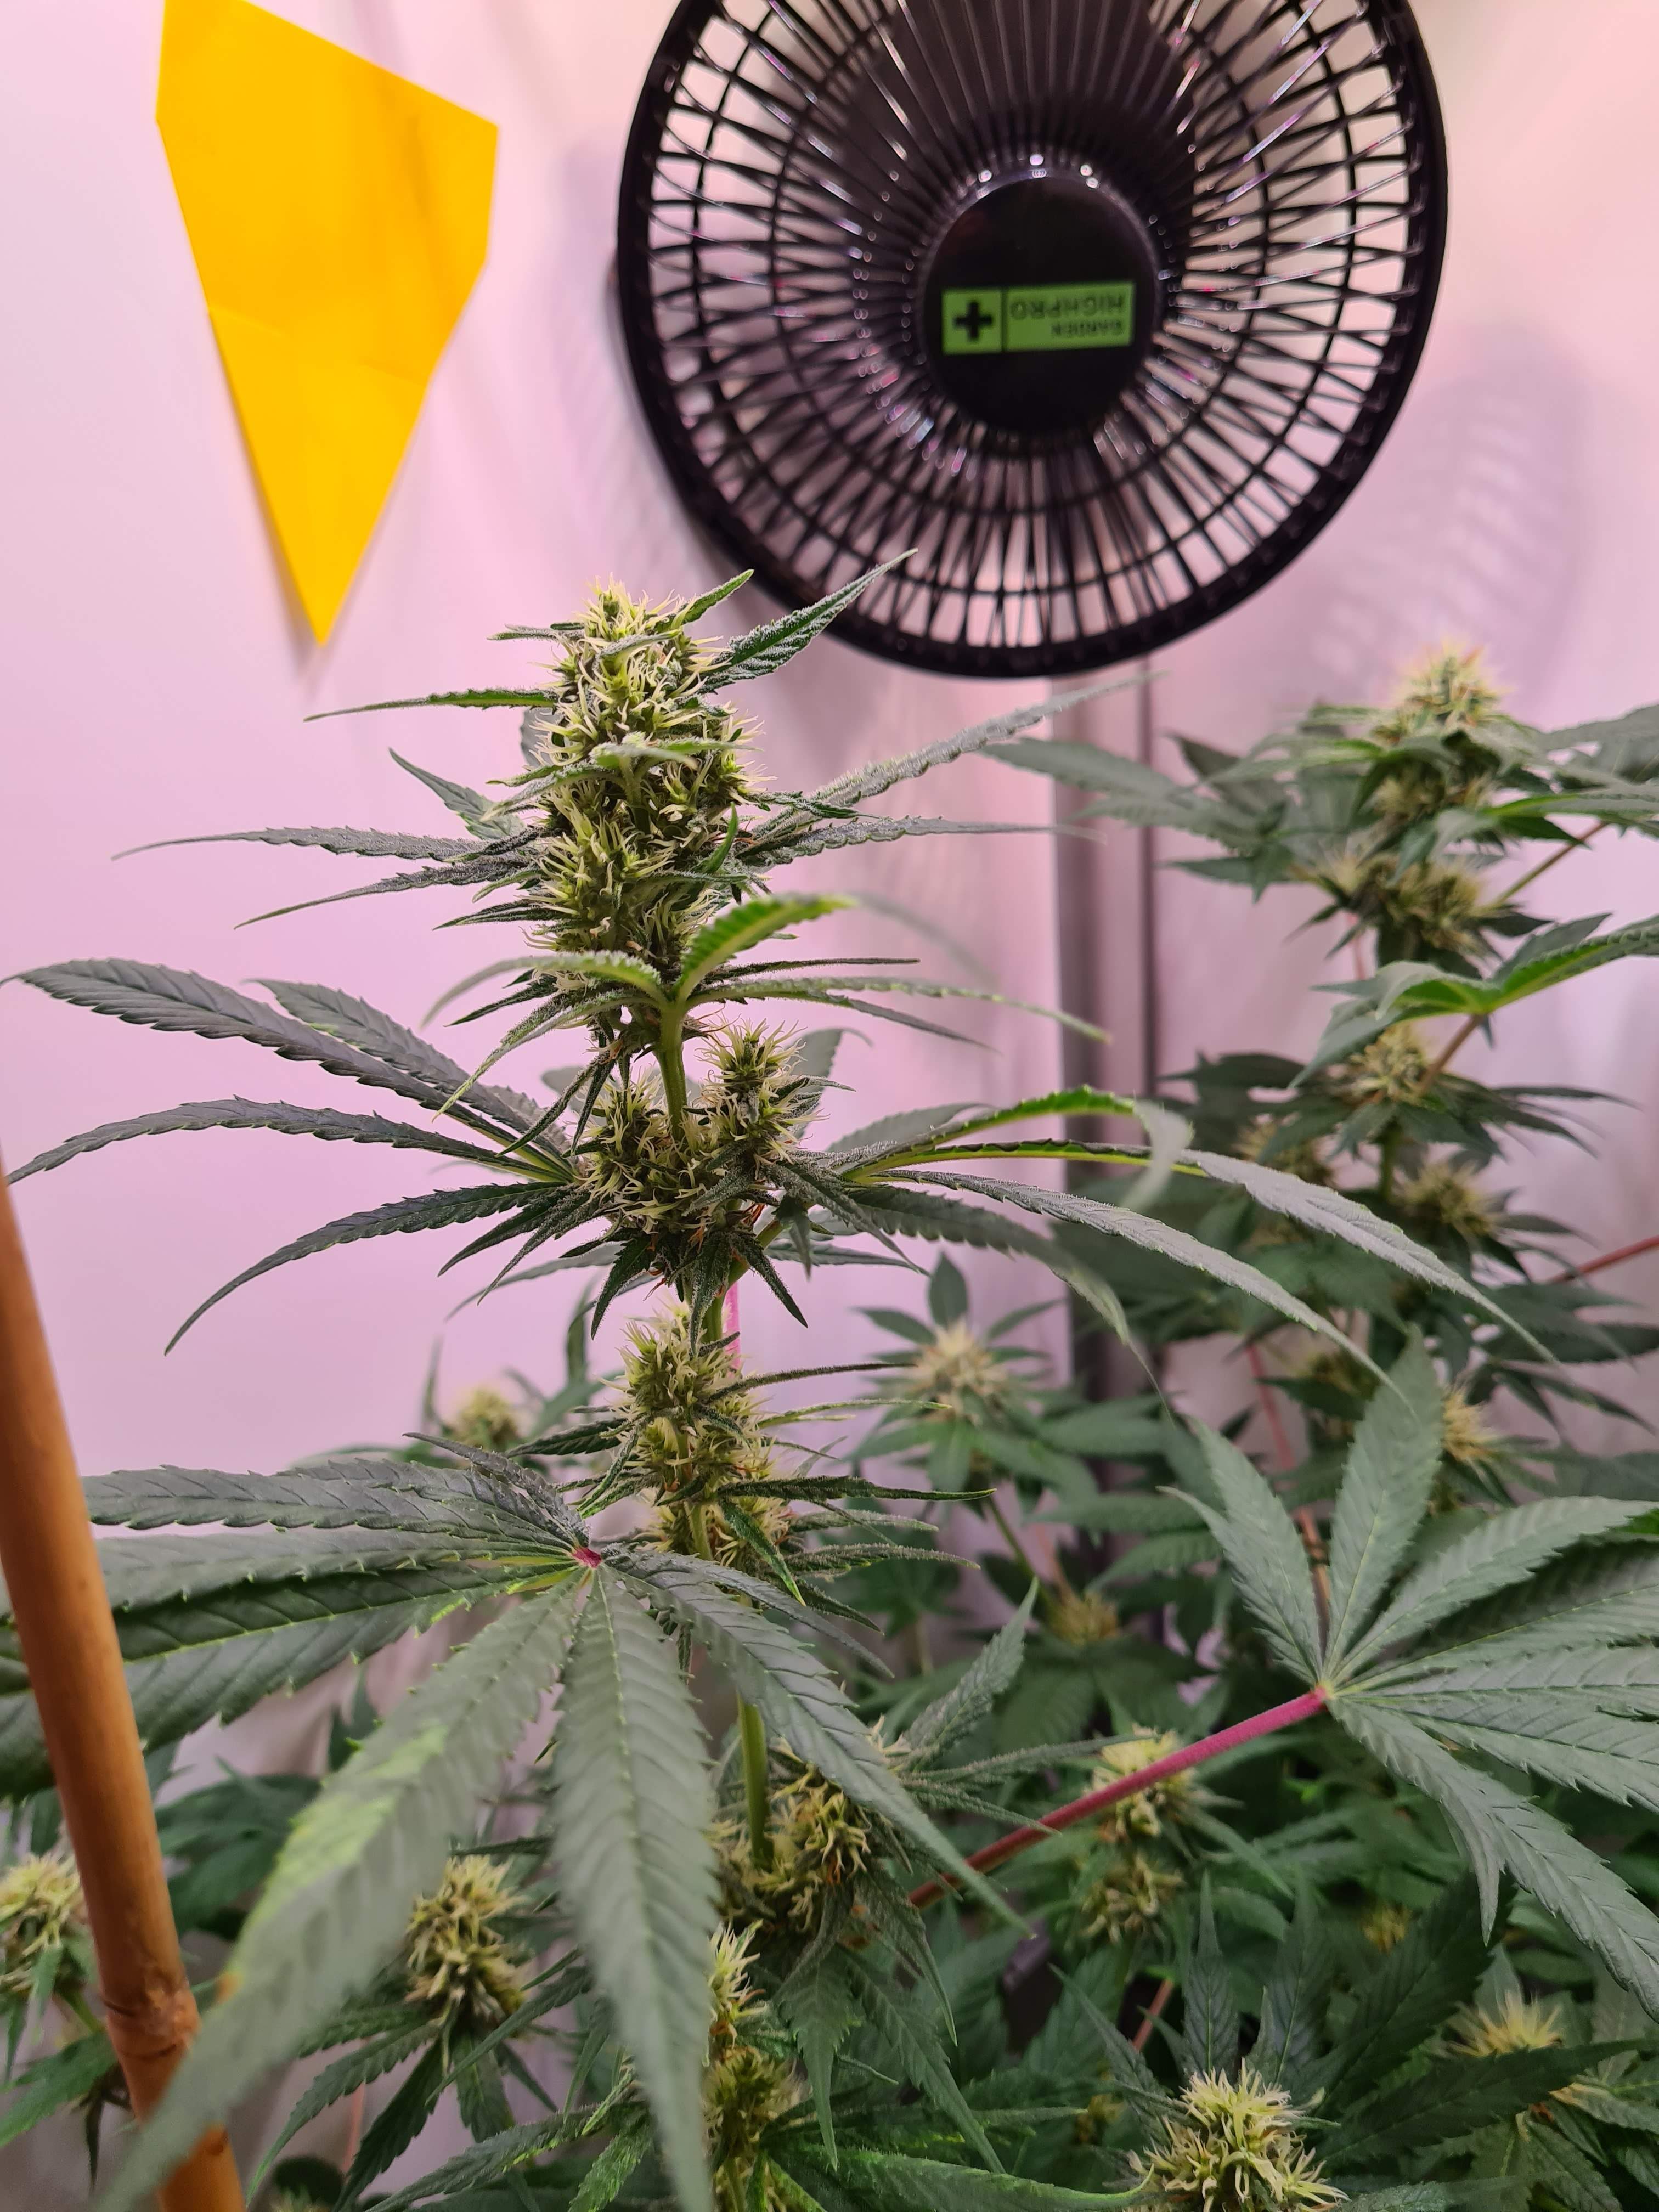 a fan hanging from a wall next to a plant